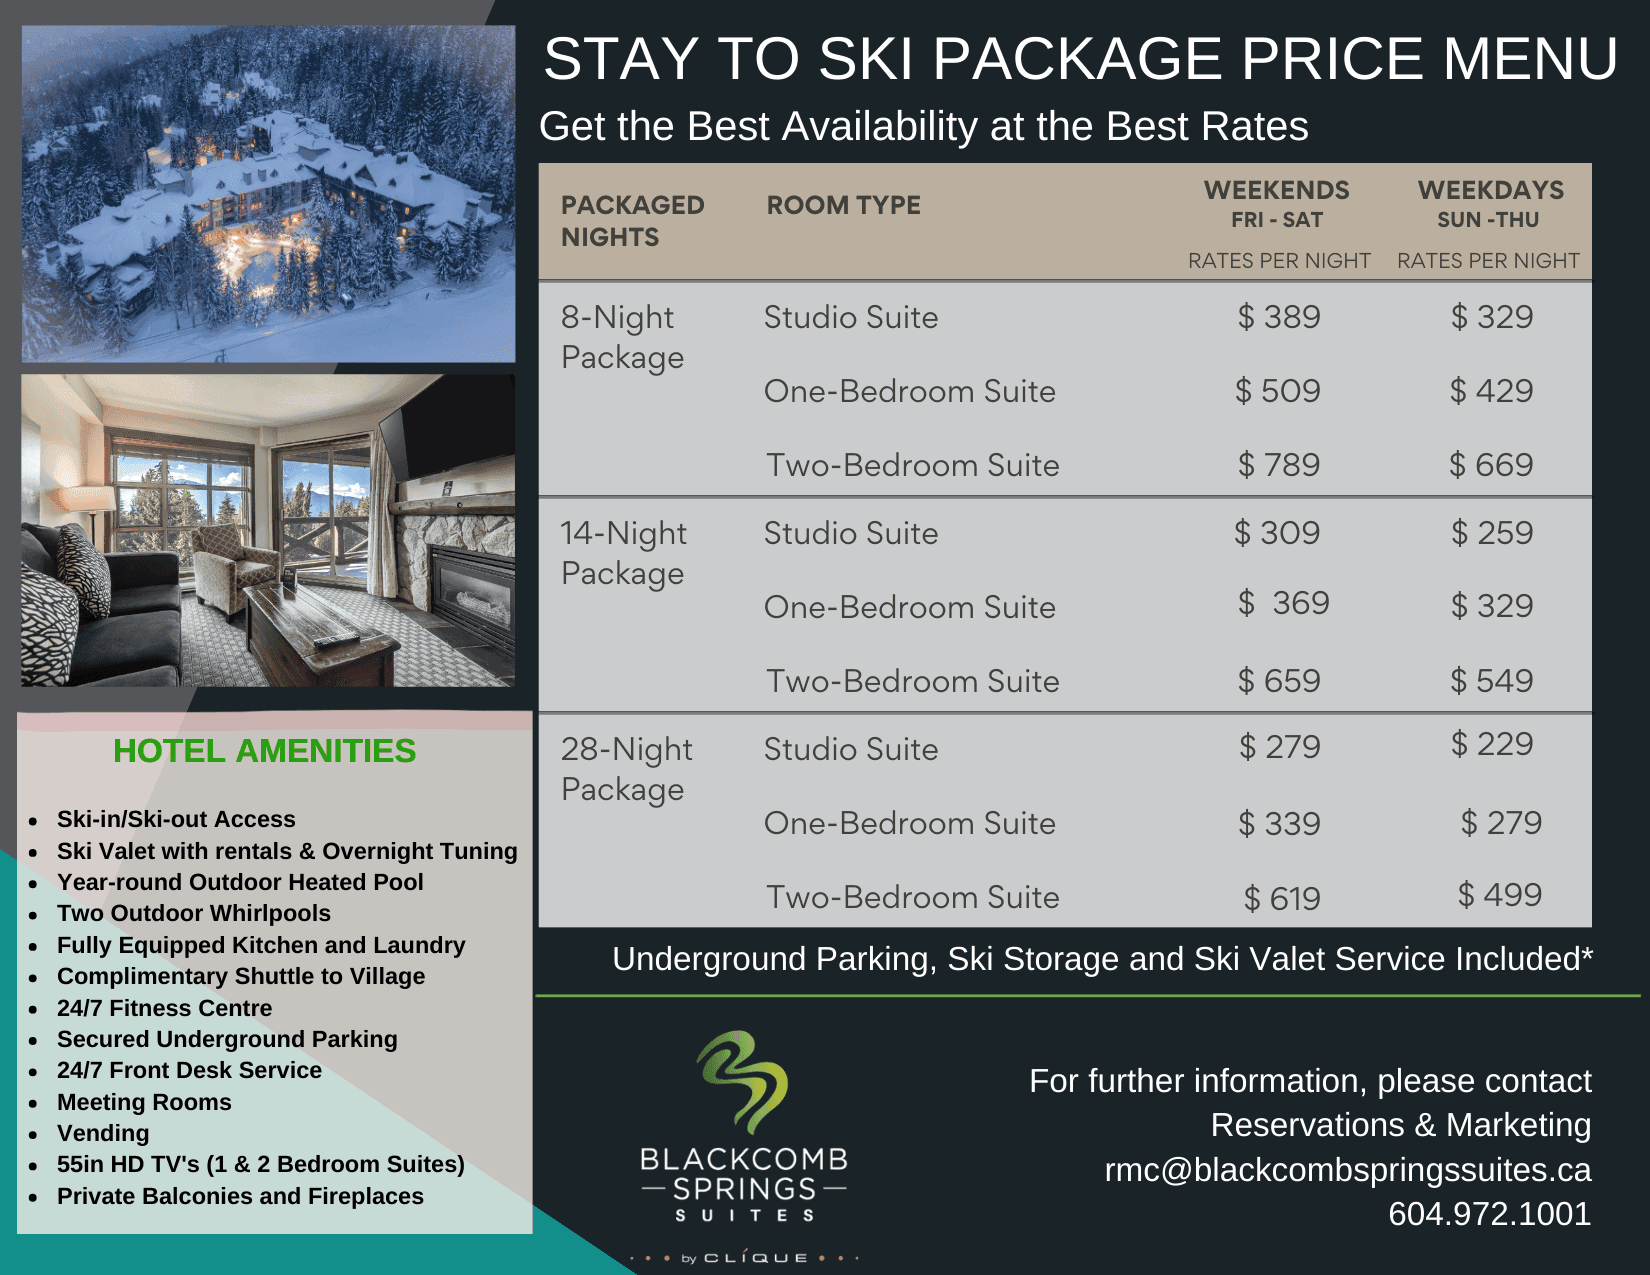 Stay to Ski Accommodation Package price menu at Blackcomb Springs Suites